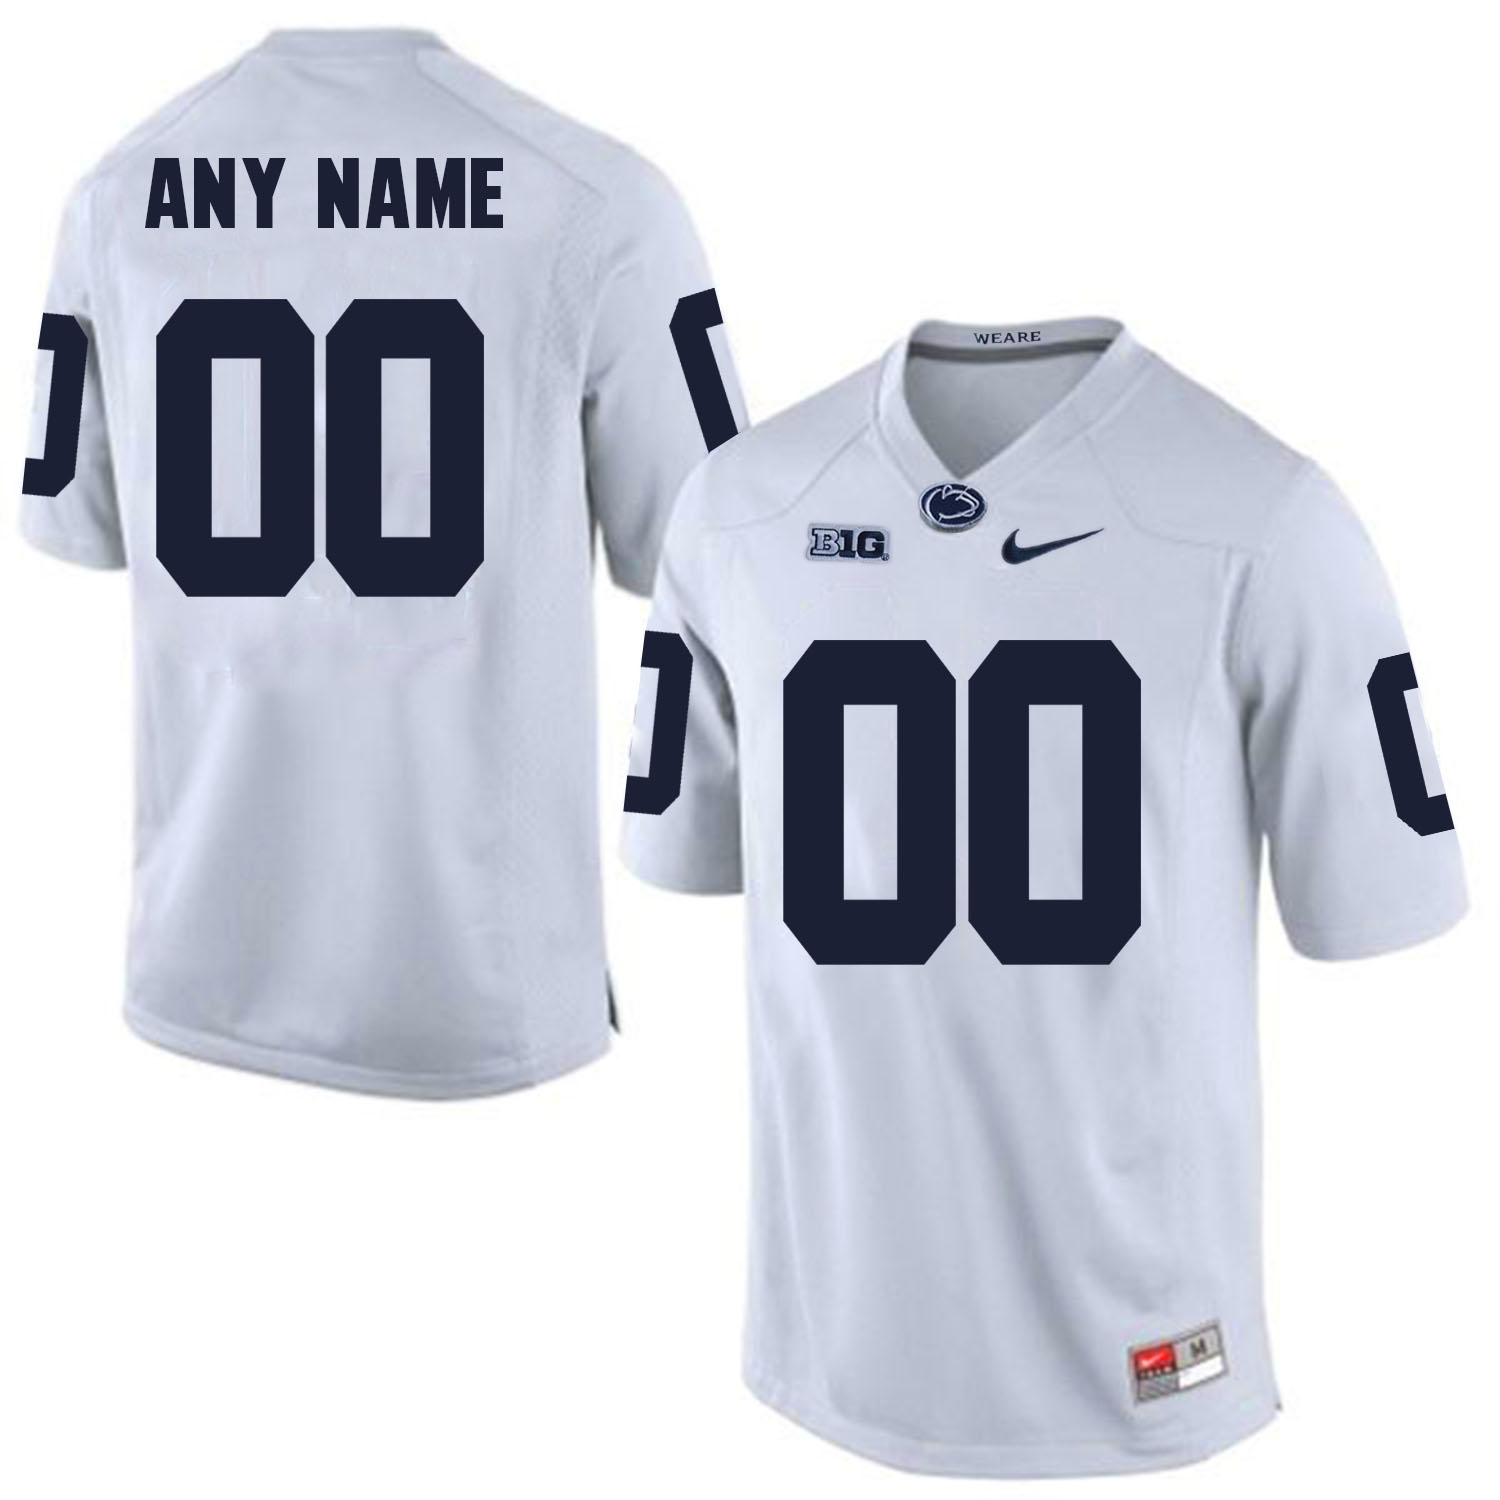 Penn State White Men's Customized College Football Jersey